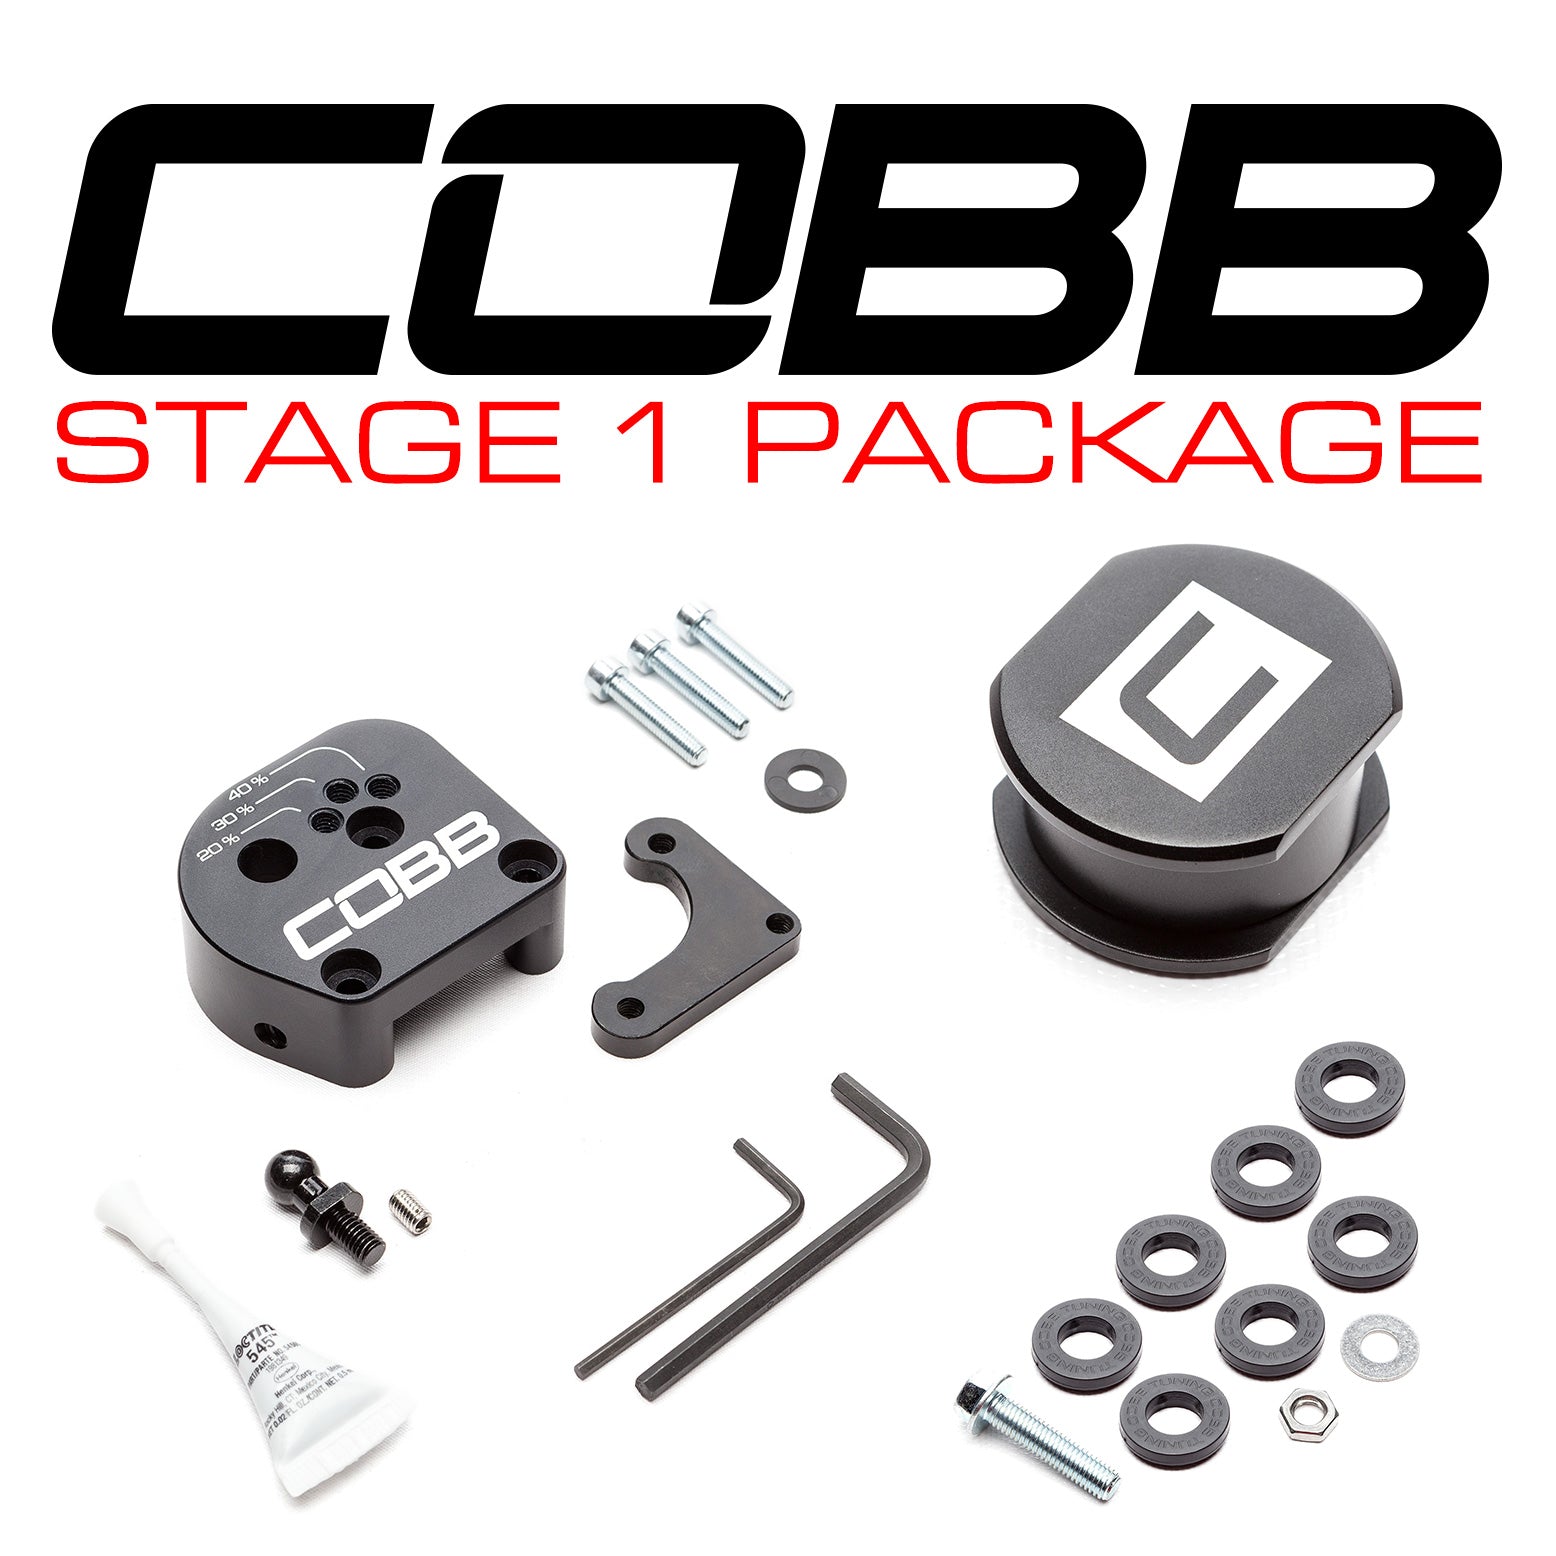 COBB FOR0DT00E0 FORD Stage 1 Drivetrain Package (Exterior) Focus ST 2013-2018, Focus RS 2016-2018 Photo-0 